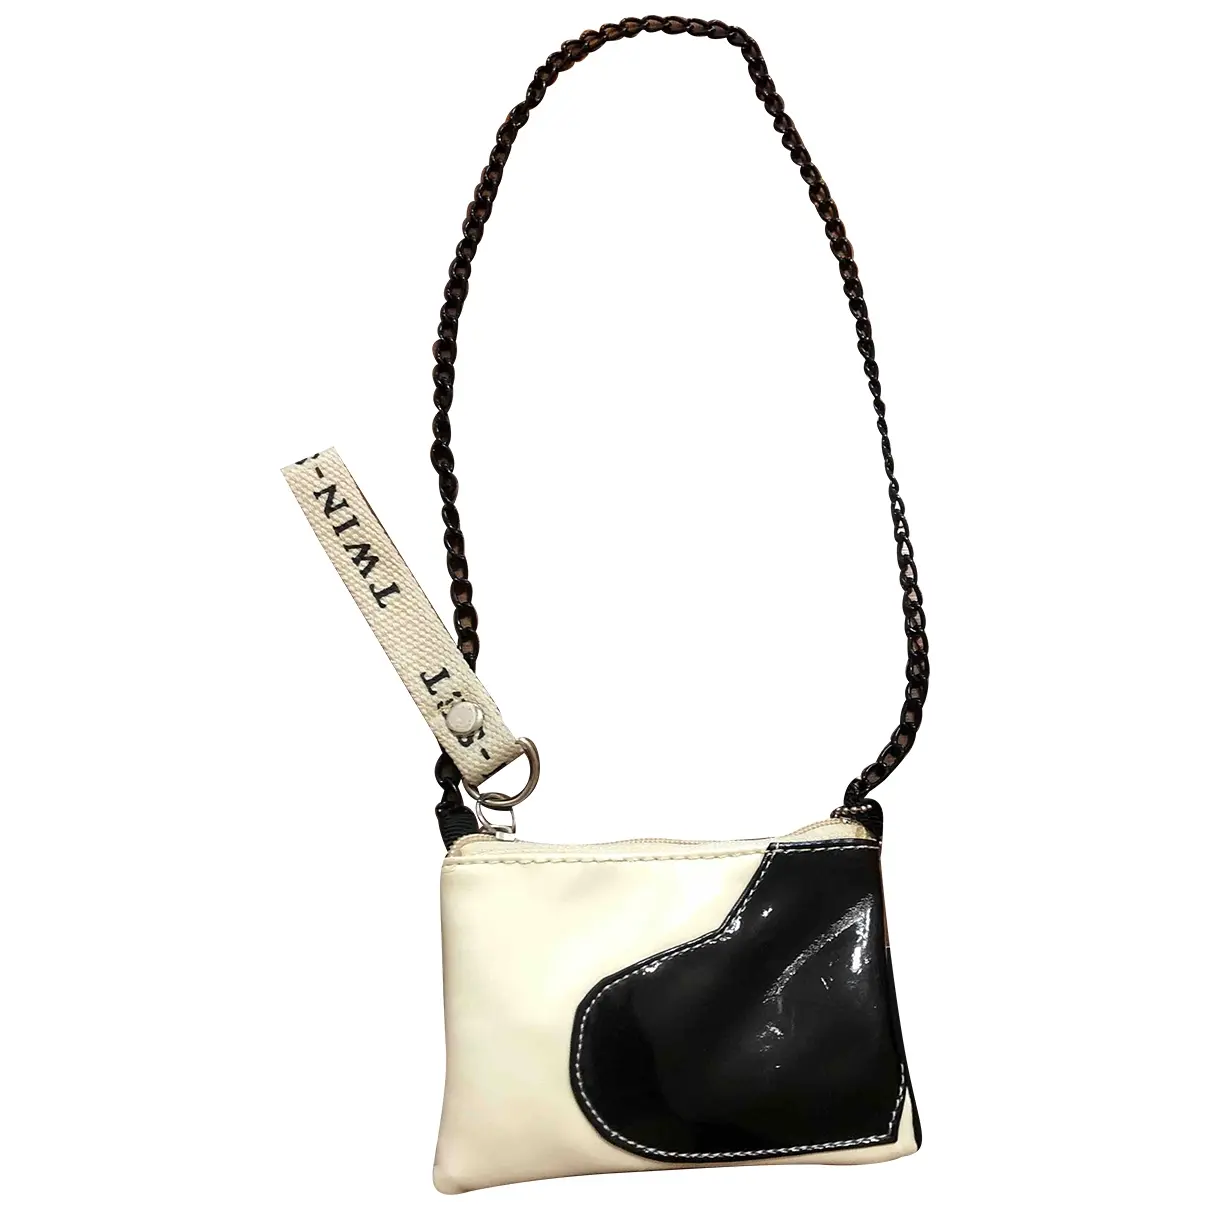 Patent leather clutch bag Twinset